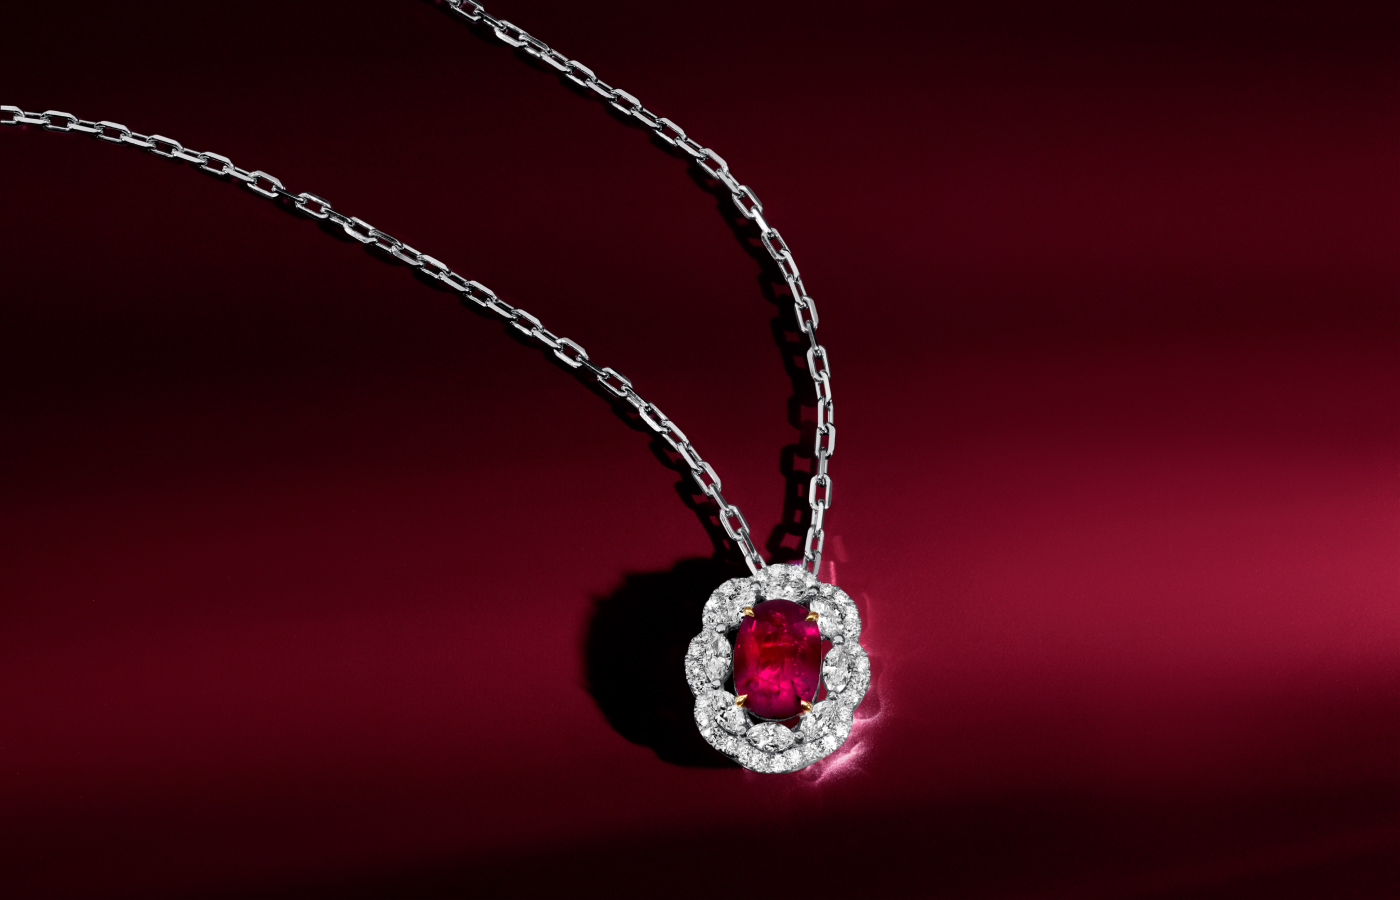 Le Vian Couture® pendant with 2.5 carats of Passion Ruby™ and 1.1 carats of Vanilla Diamonds® set in platinum with 18K Honey Gold™